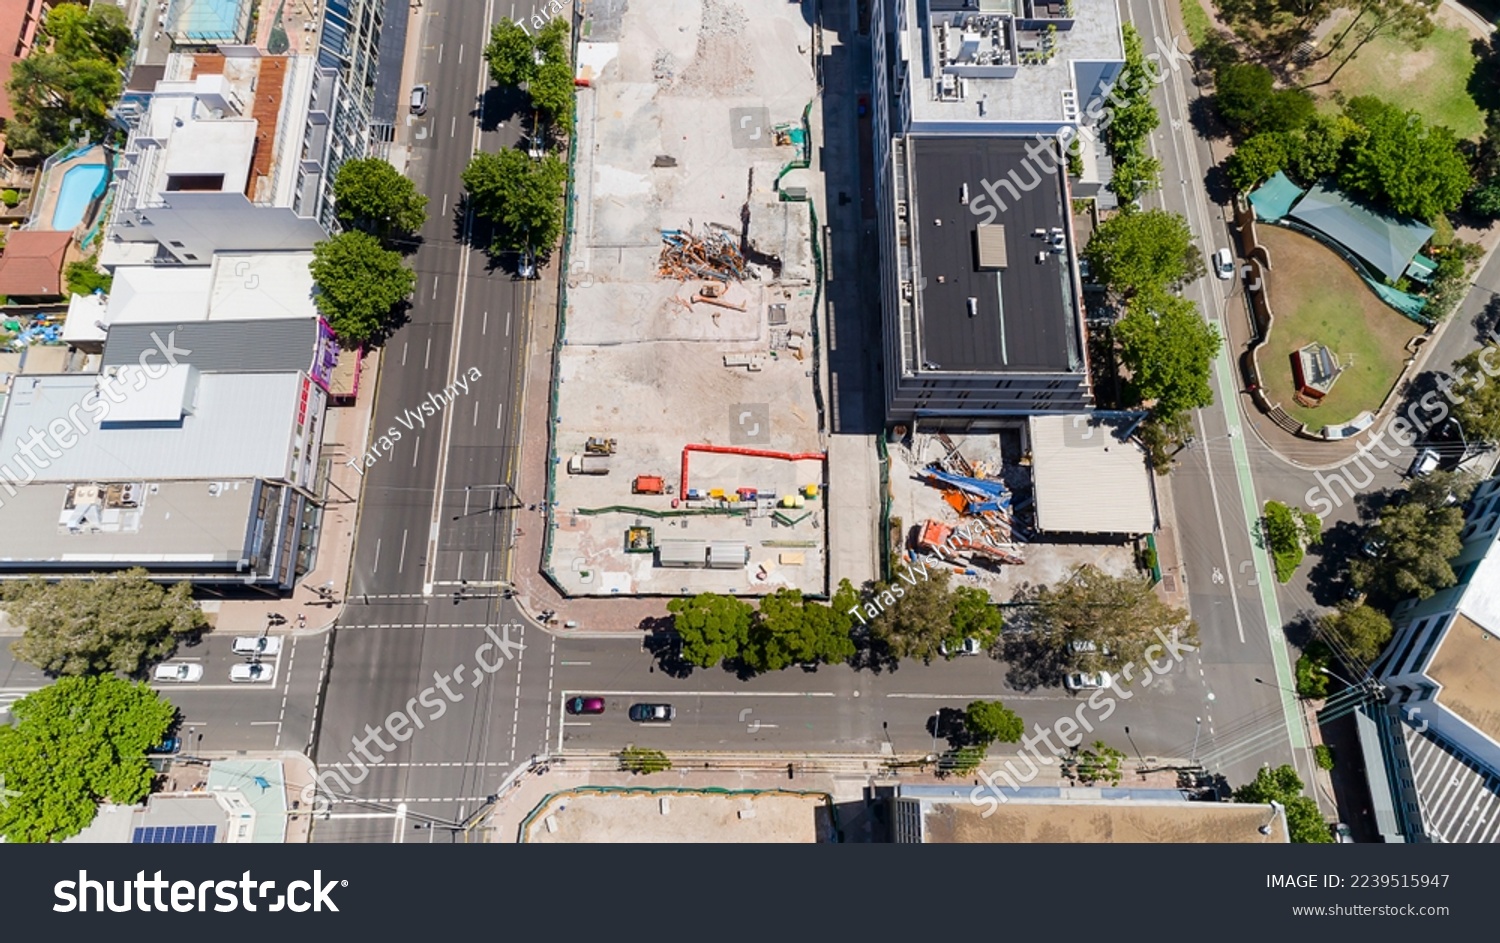 Crows Nest metro station in North Sydney - aerial top down view of construction site. #2239515947